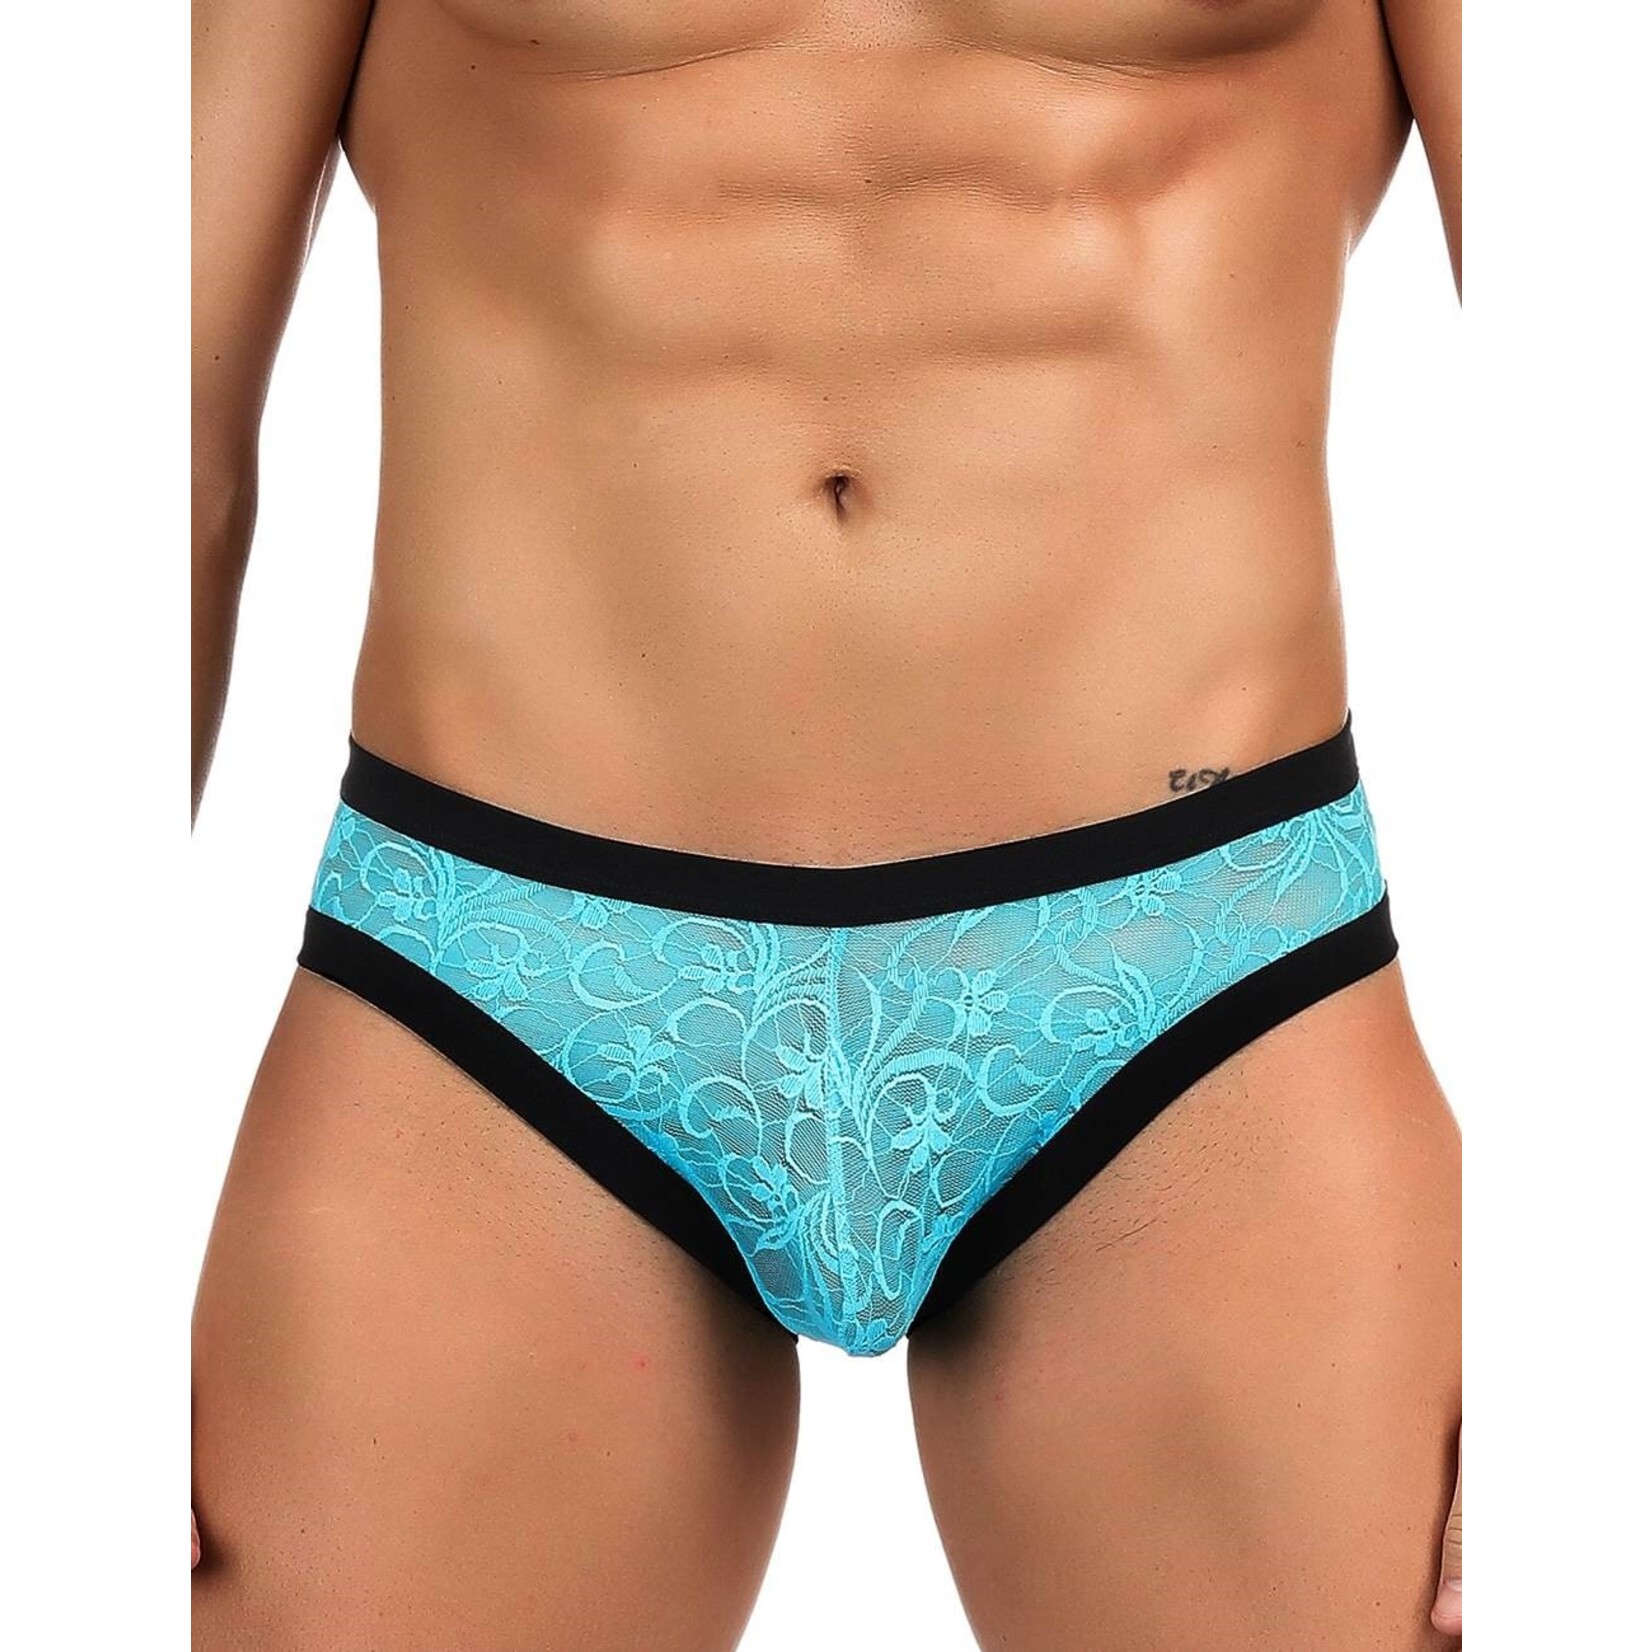 OH YEAH! -  SEXY BLUE LACE PANTY FOR MEN M